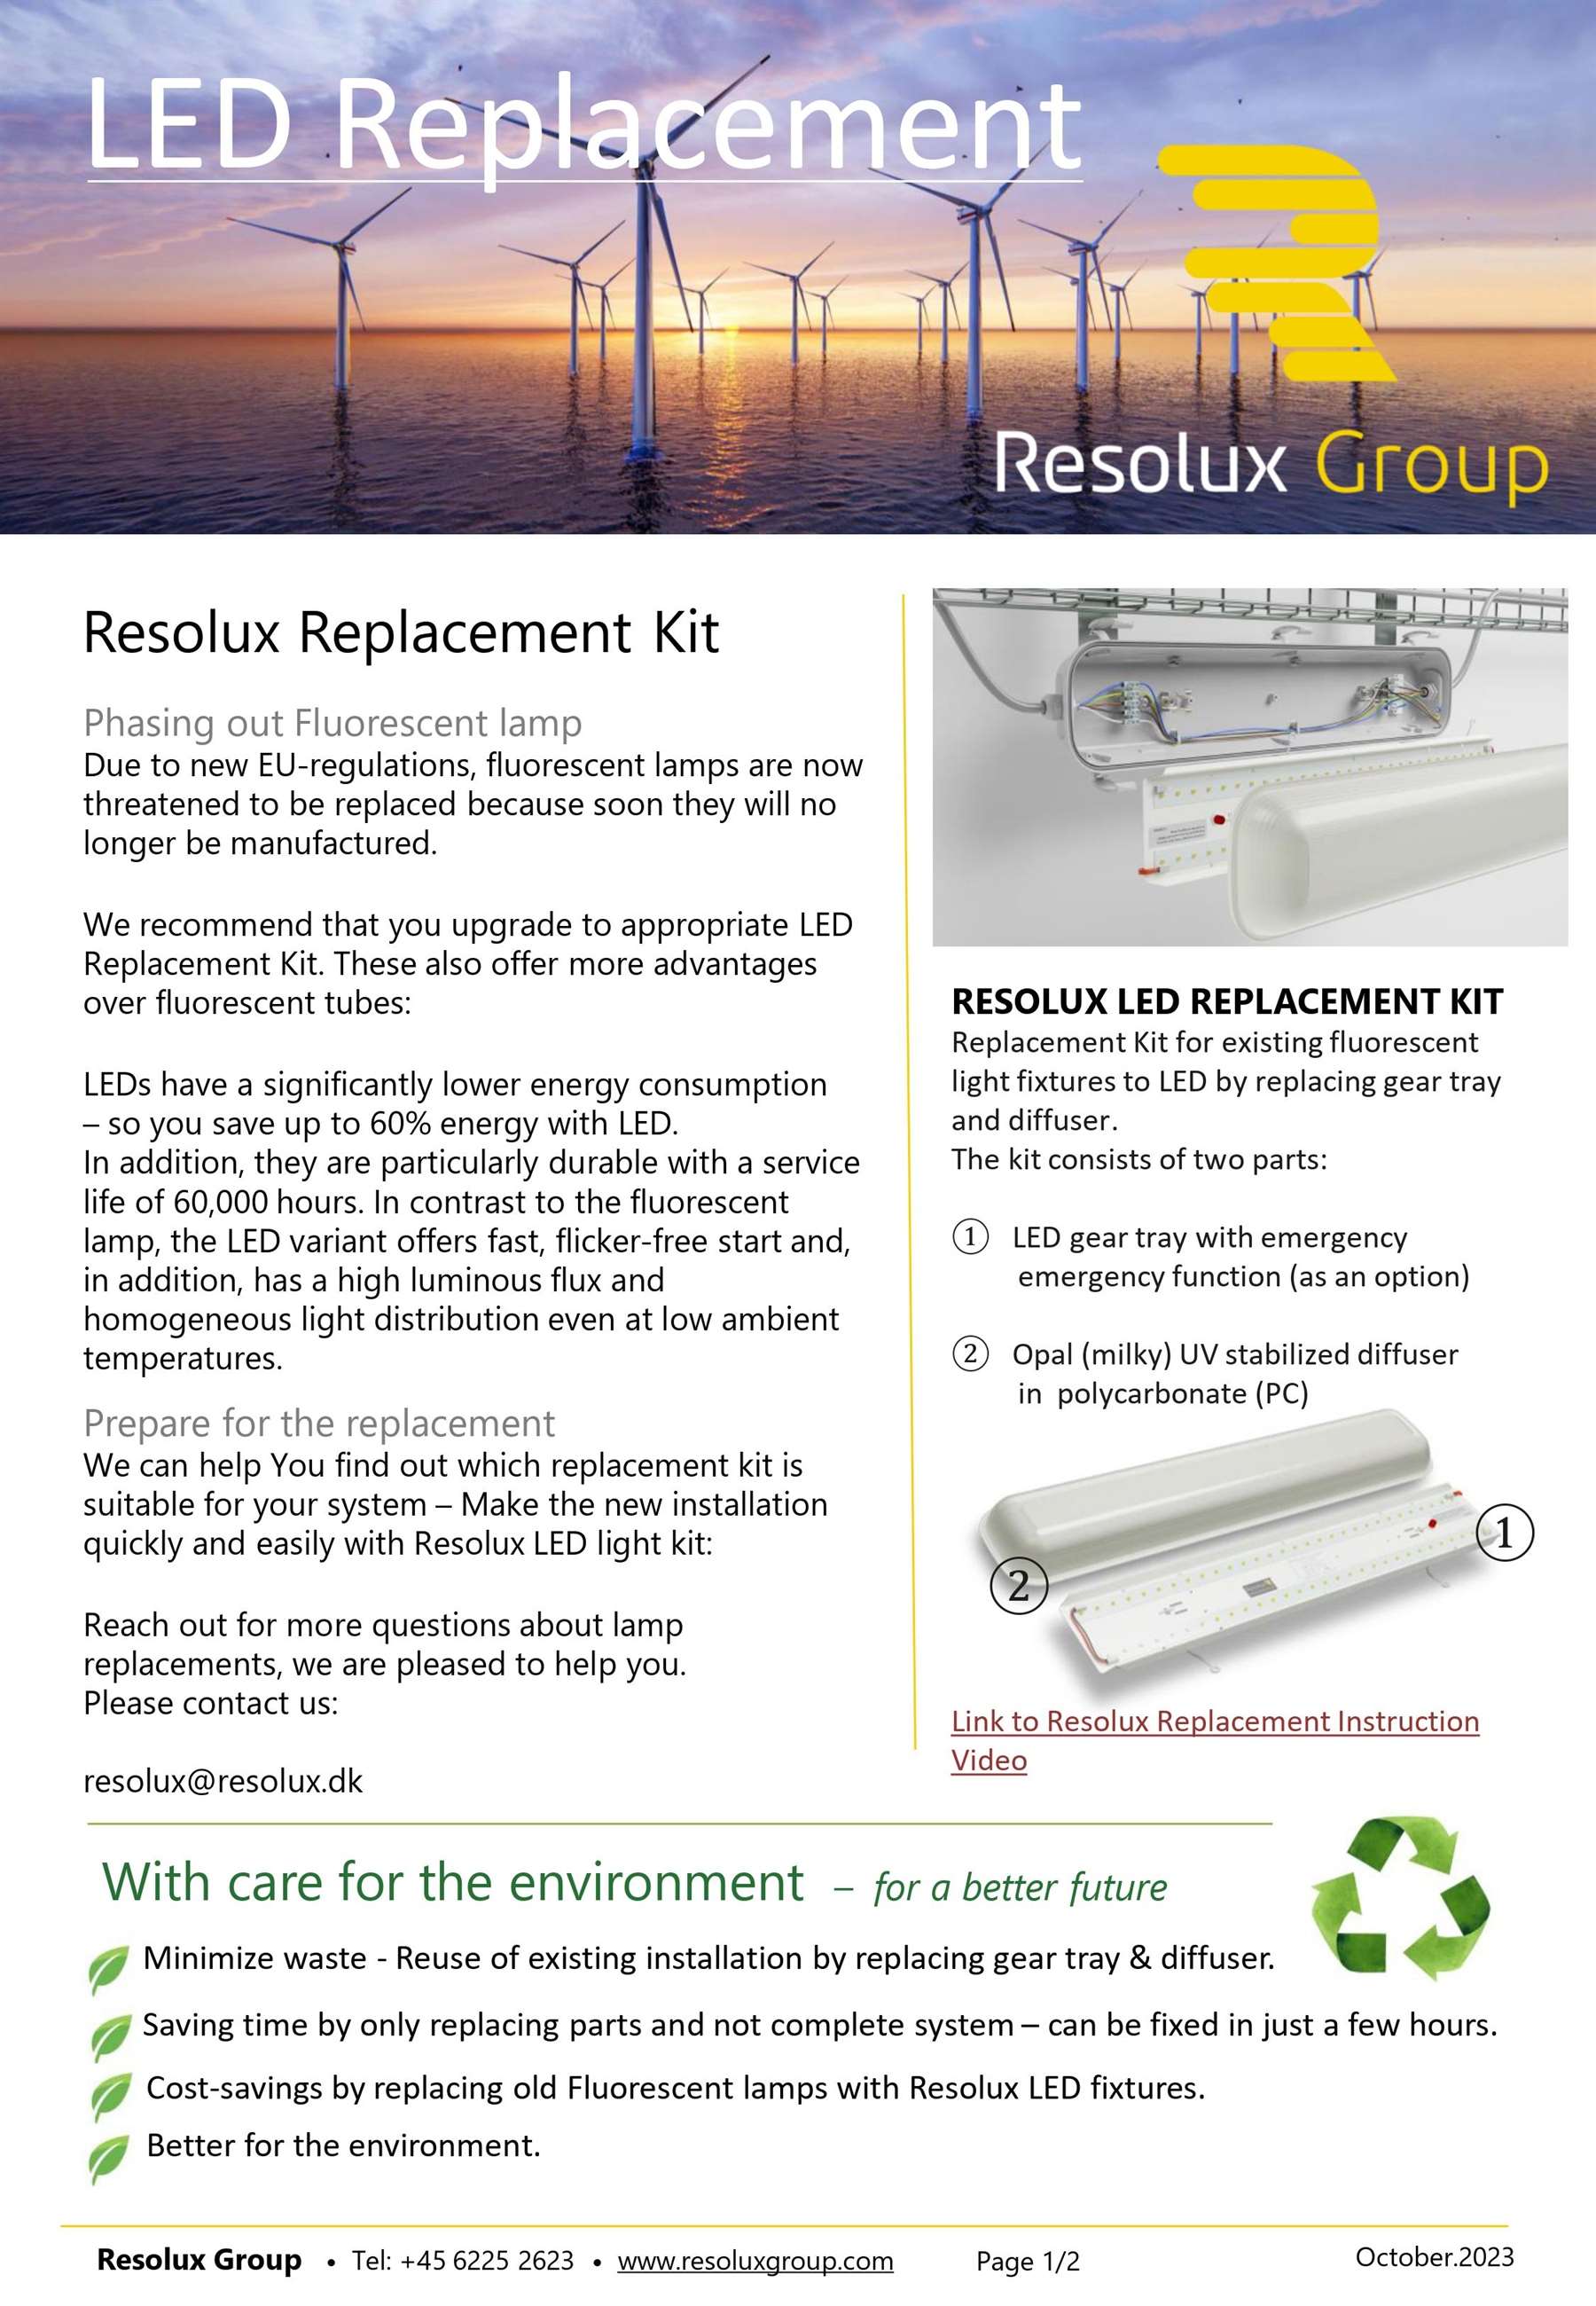 data sheet - led replacement kit_page 1-2 